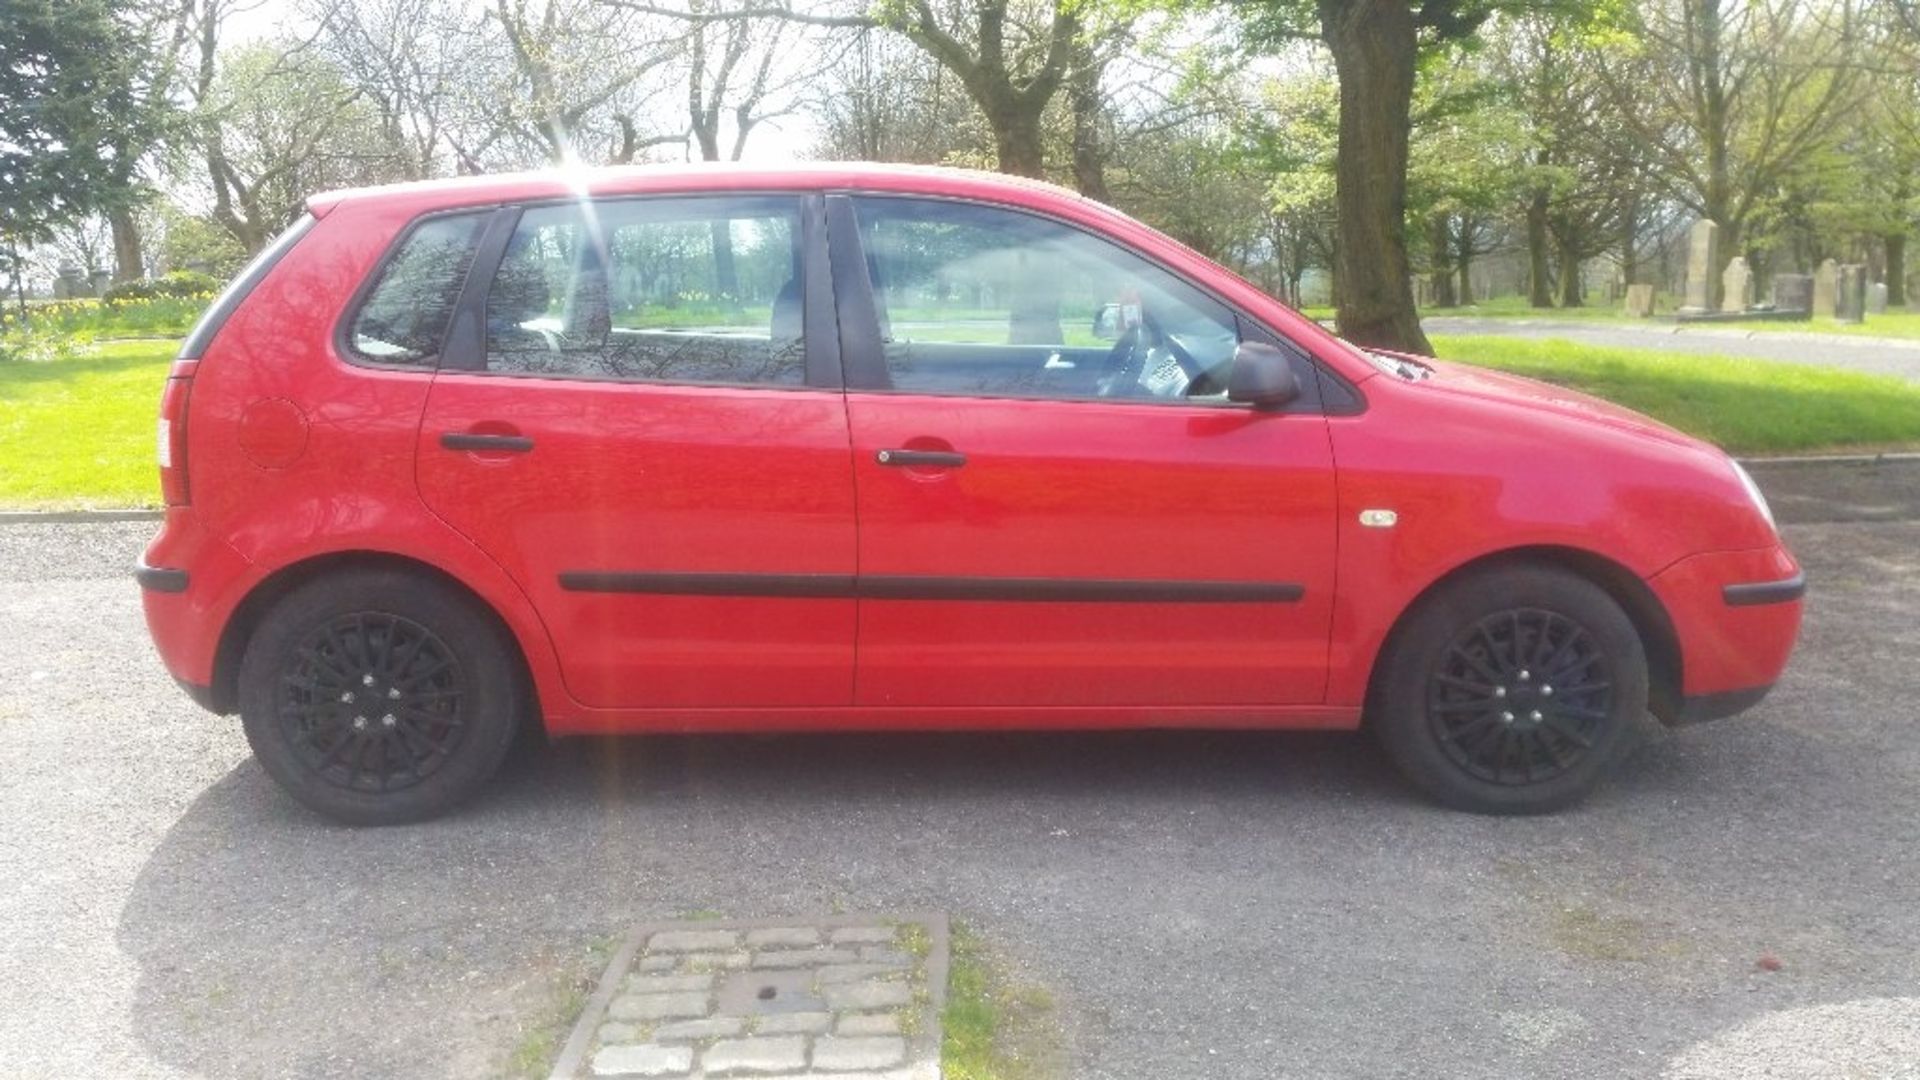 VOLKSWAGEN, POLO S, YO02 LMJ, 1-2 LTR, PETROL, MANUAL, 4 DOOR HATCH, 14.06.2002, CURRENT RECORDED - Image 7 of 12